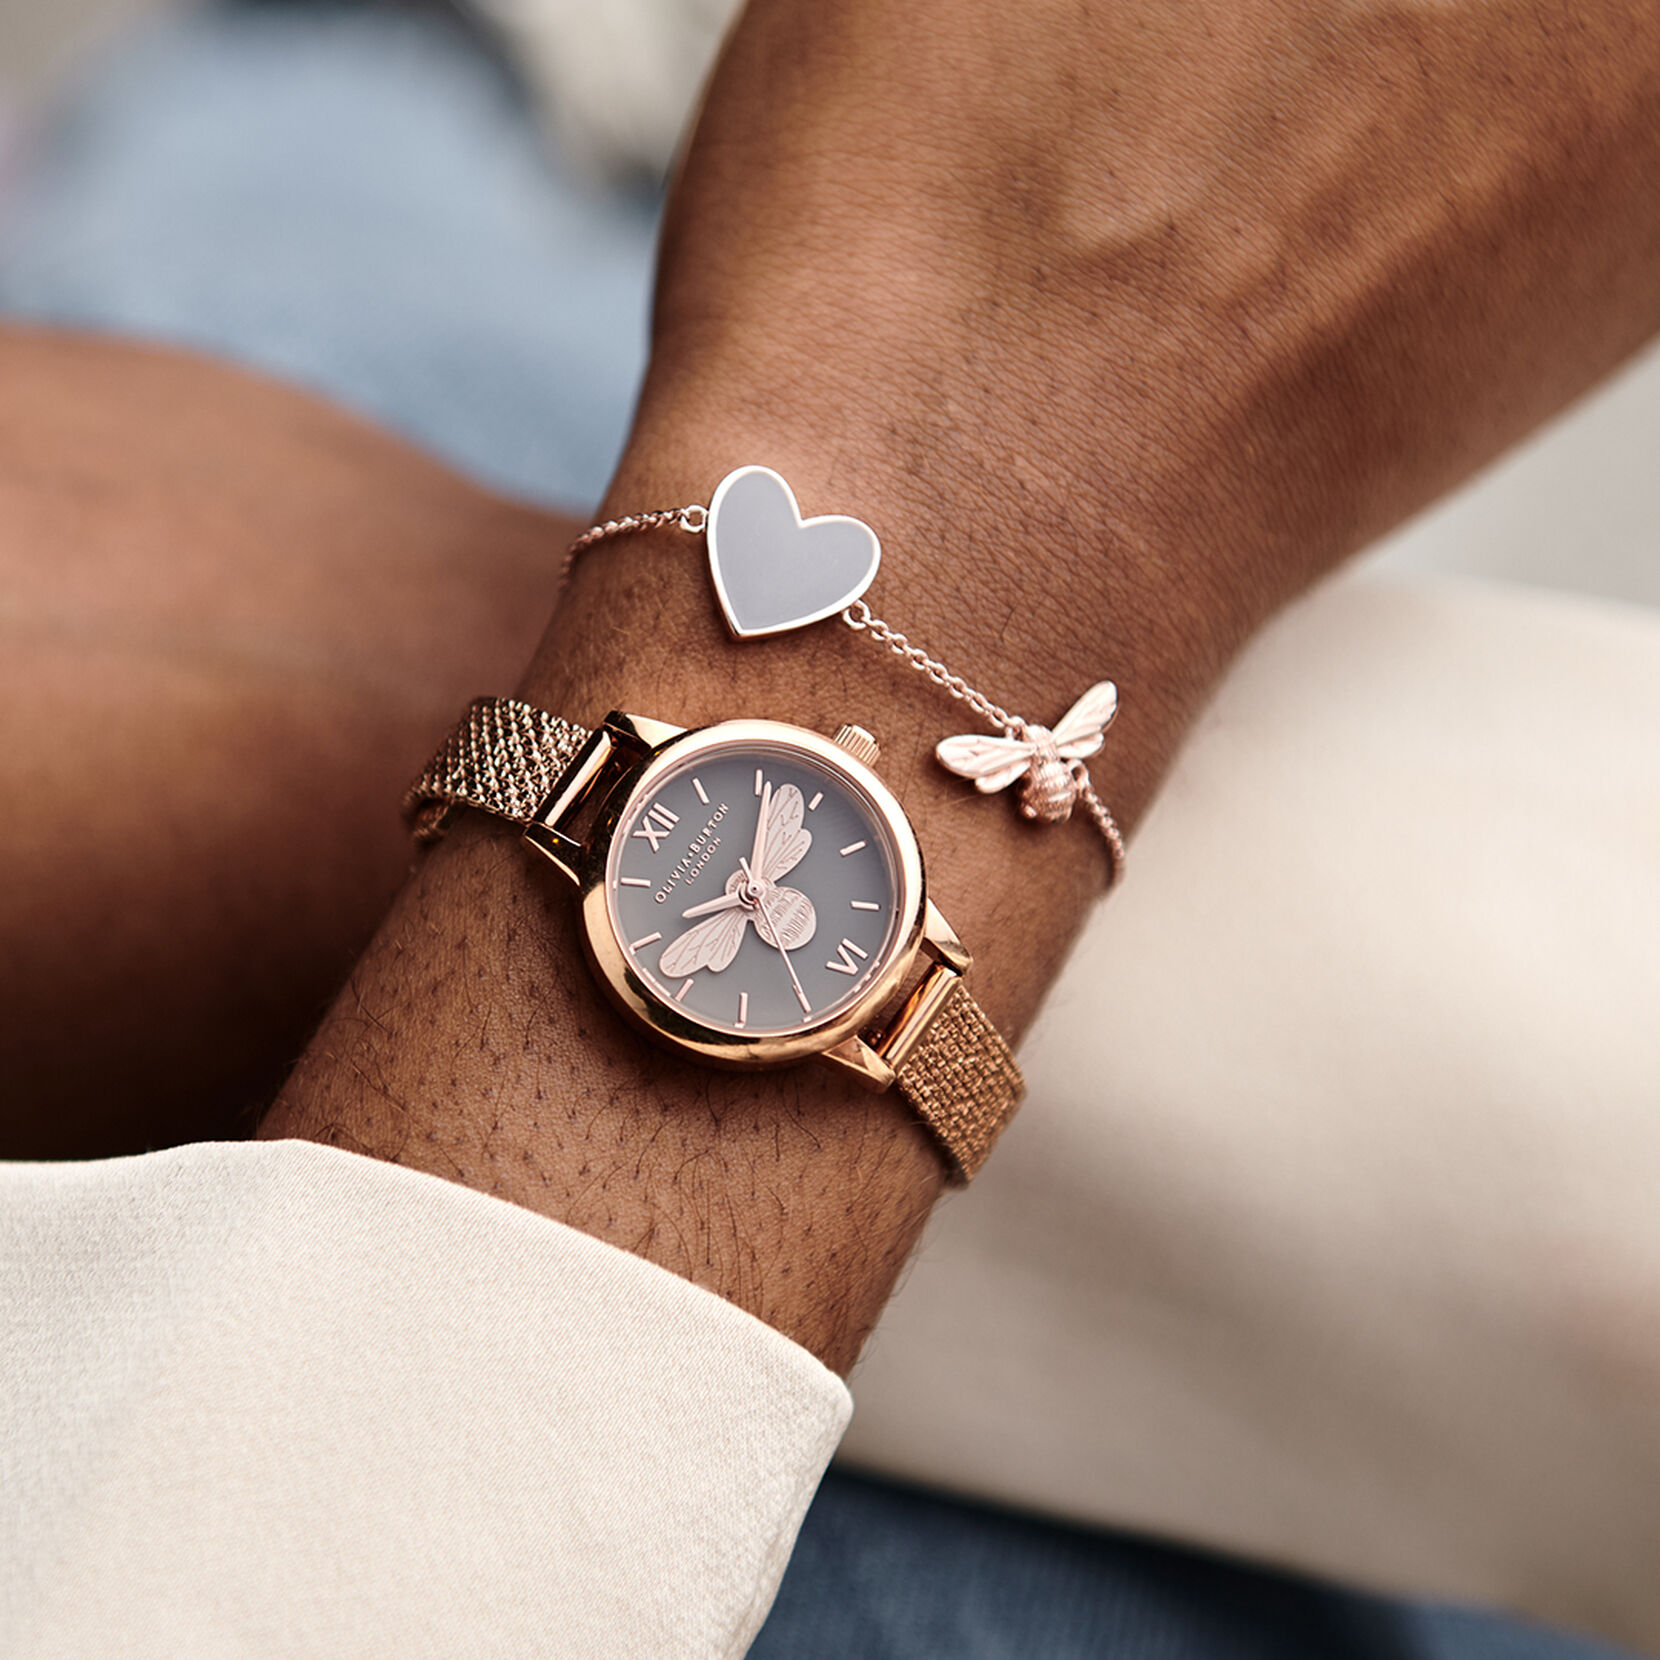 You Have My Heart Rose Gold Watch & Bracelet Giftset